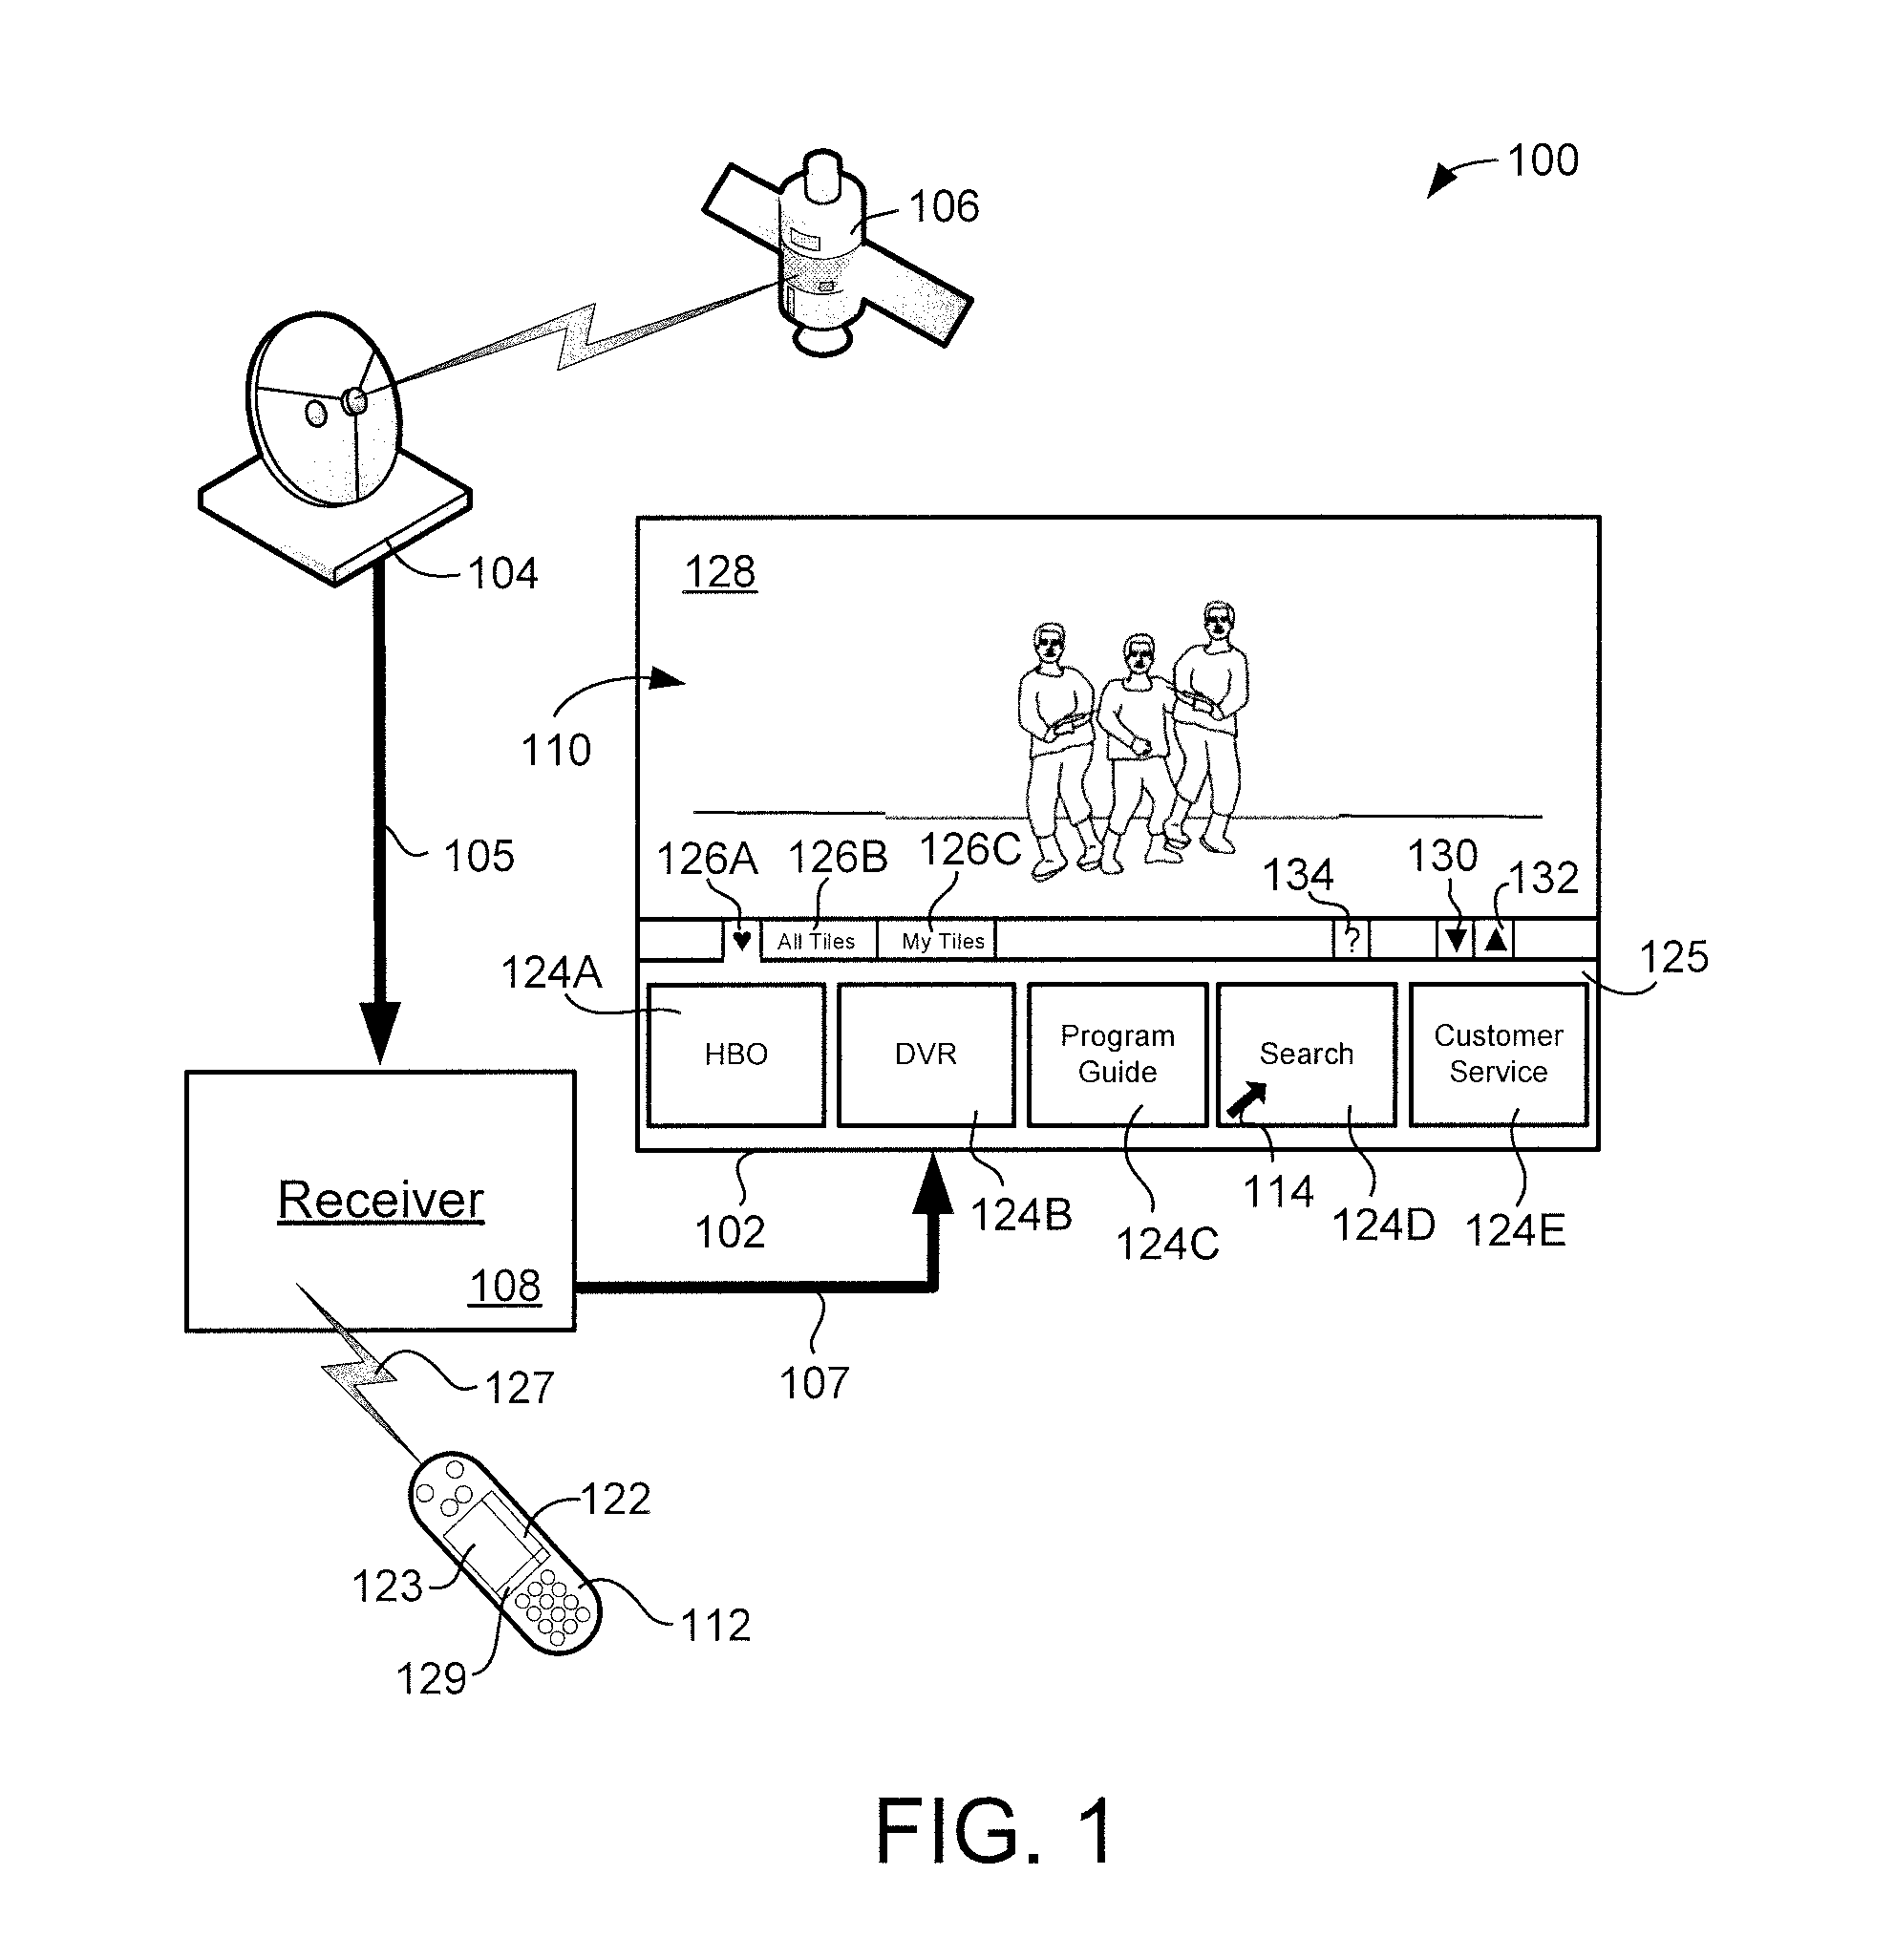 Systems and methods for providing customer service features via a graphical user interface in a television receiver